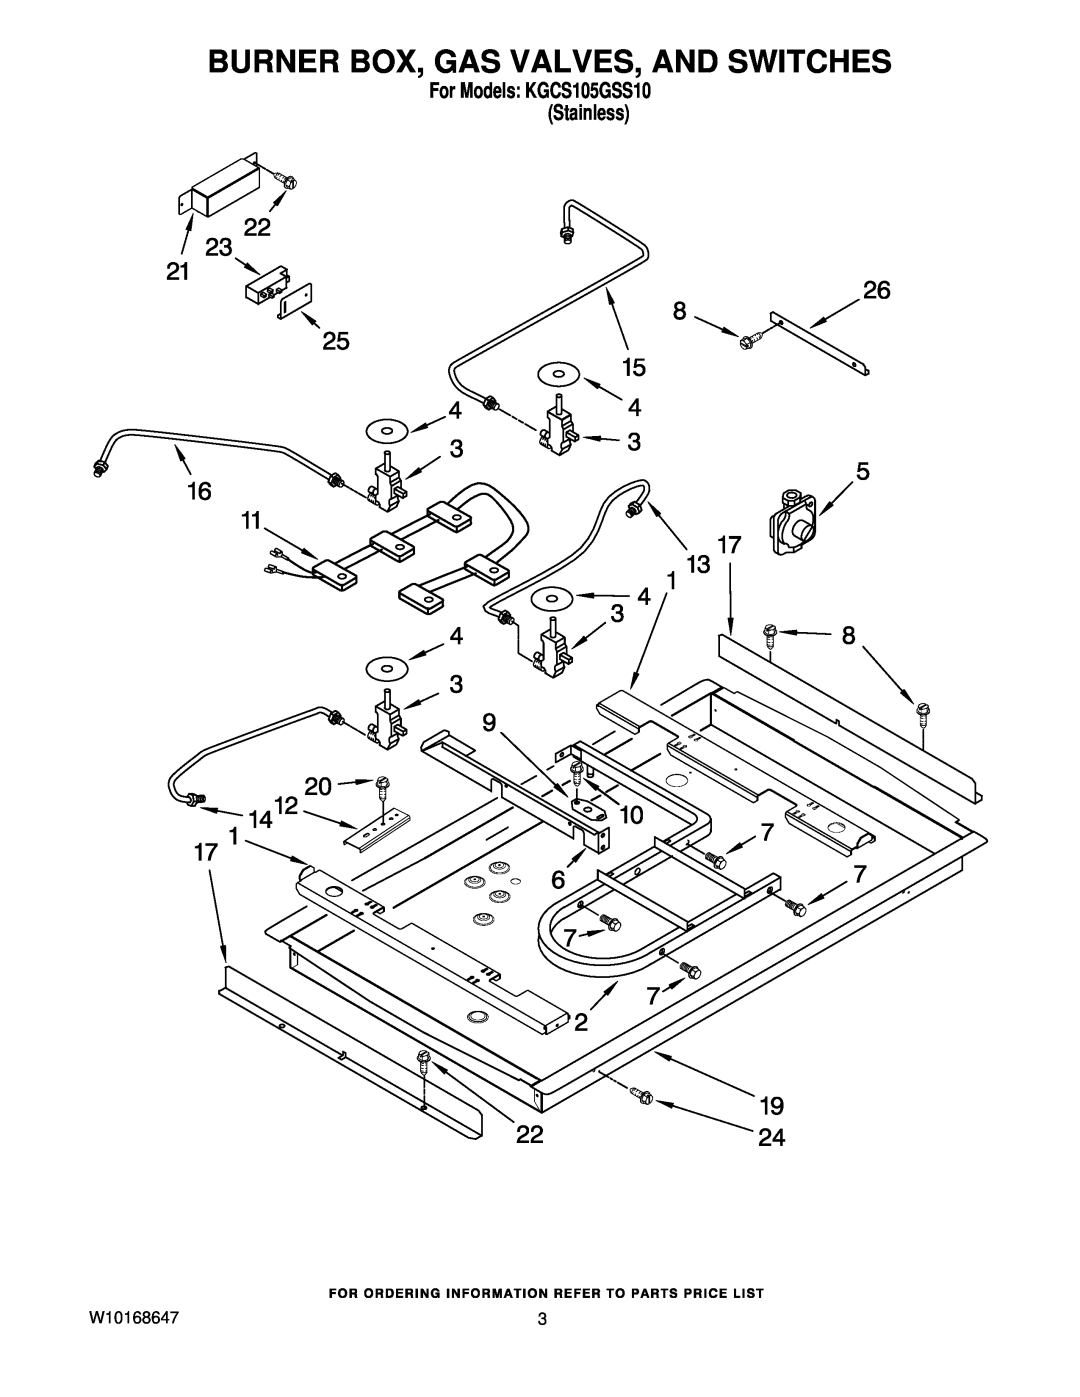 KitchenAid manual Burner Box, Gas Valves, And Switches, W10168647, For Models KGCS105GSS10 Stainless 